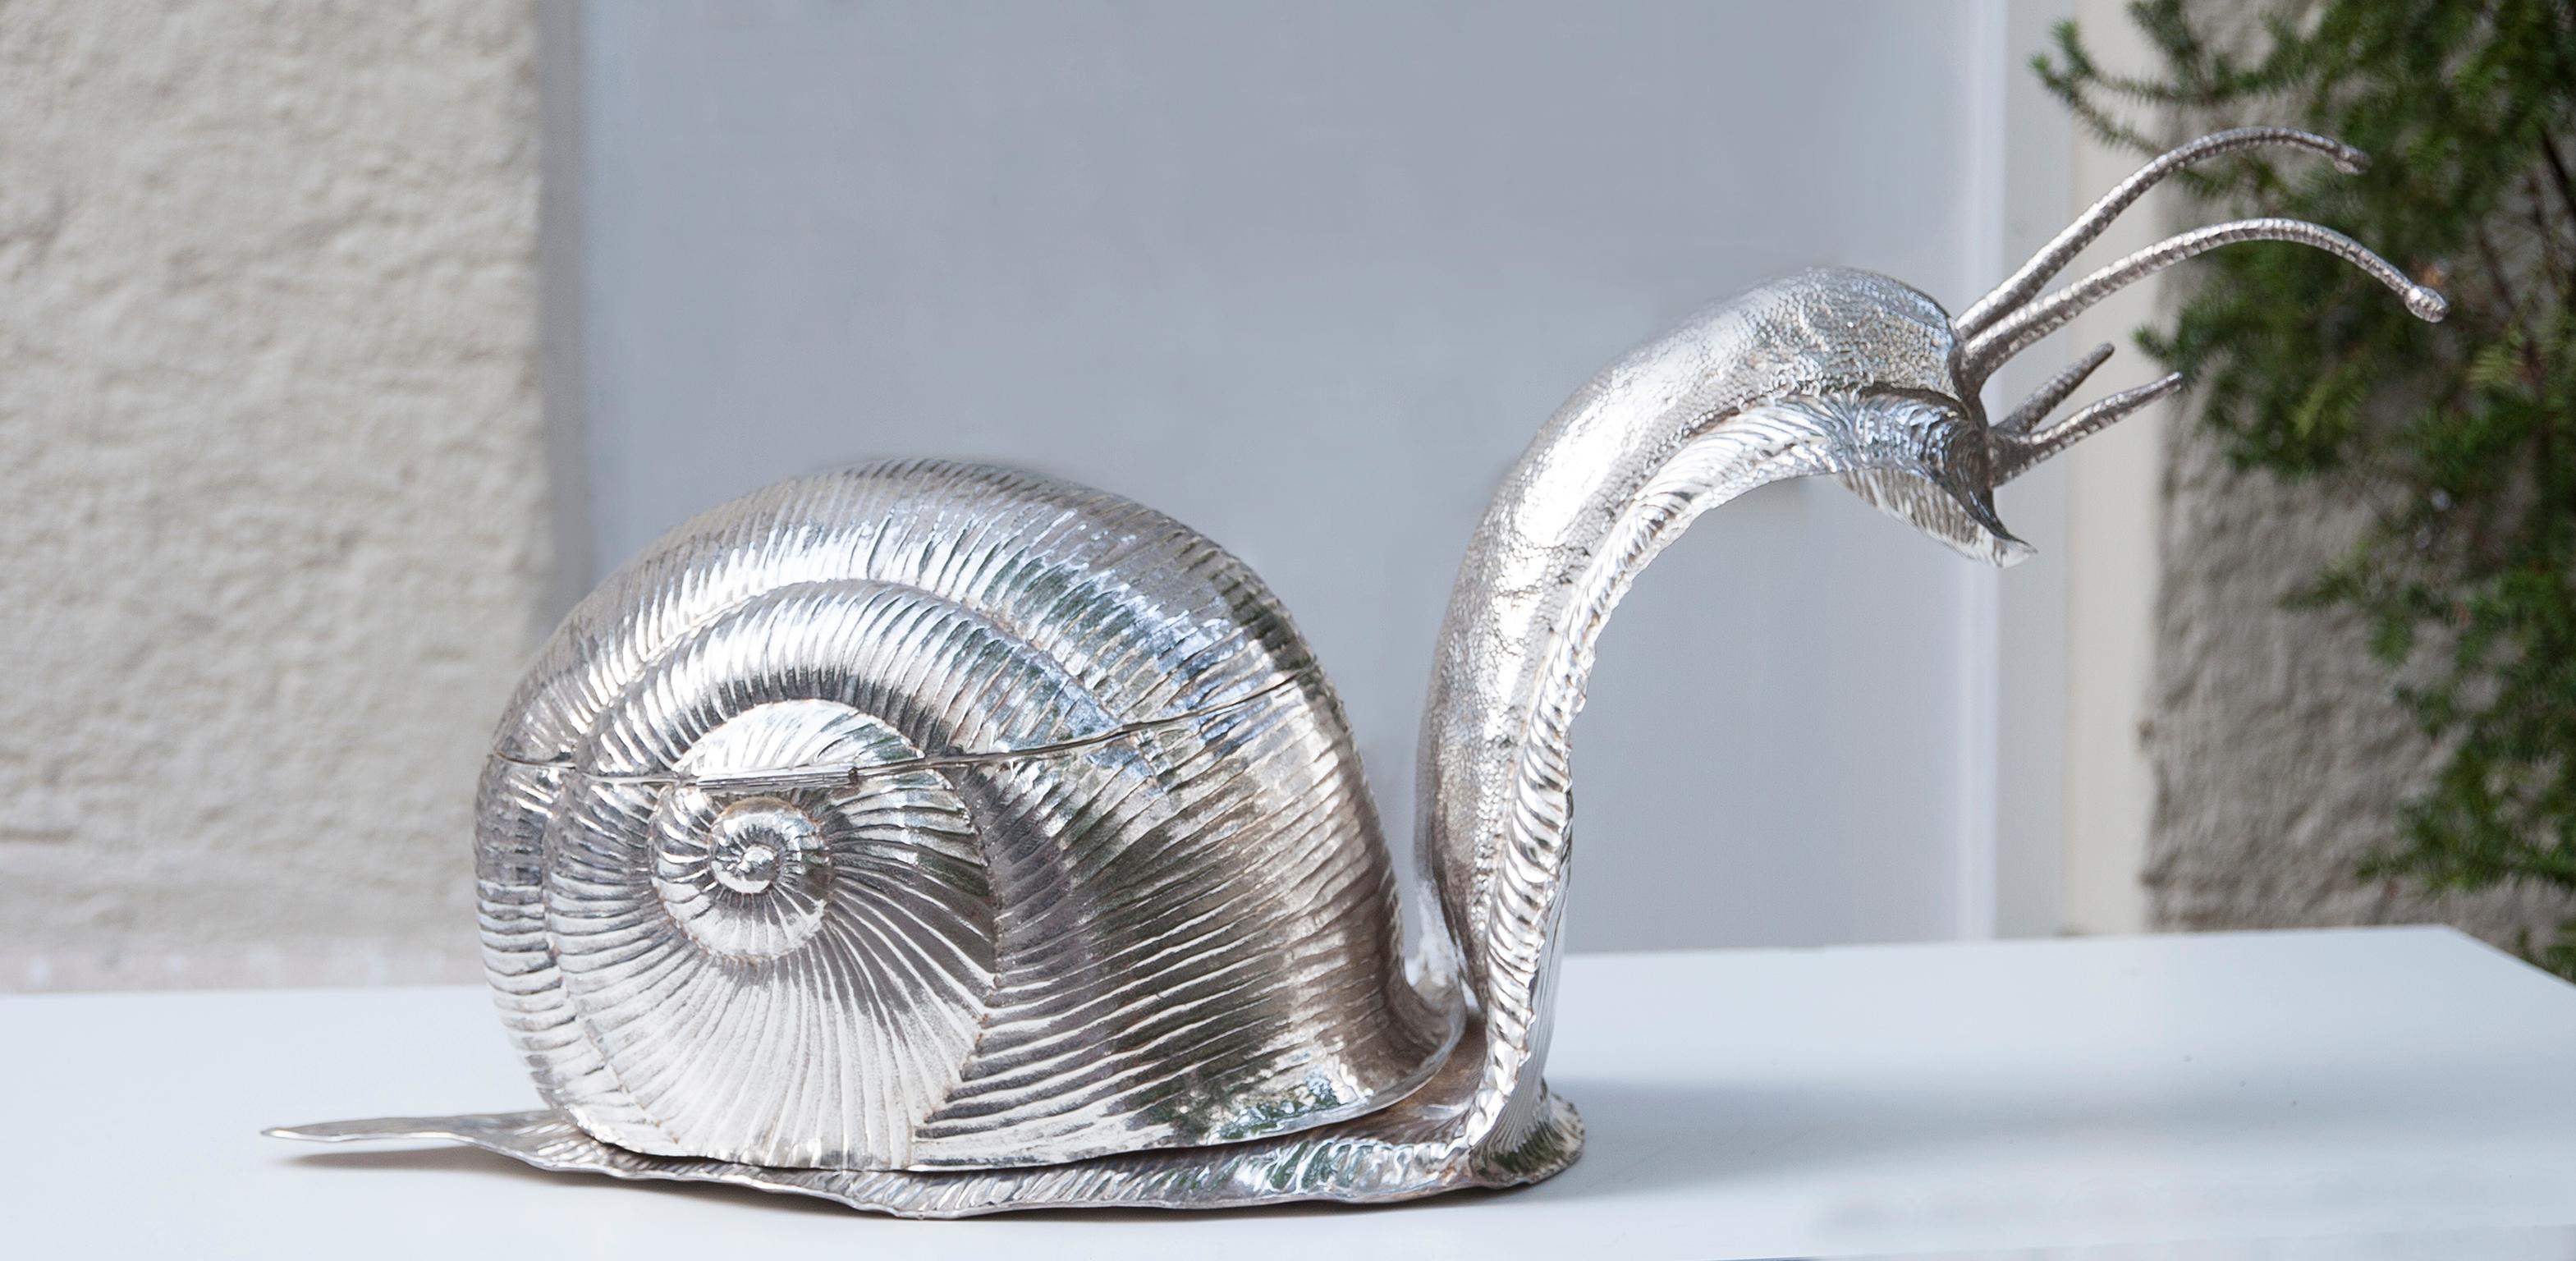 Franco Lapinis exquisite snail soup bowl is made entirely of metal plated in silver and its surface is lightly textured to give it an organic feel. When you open the back, there are two removable glass inlays plus a pepper and salt Shaker. Either